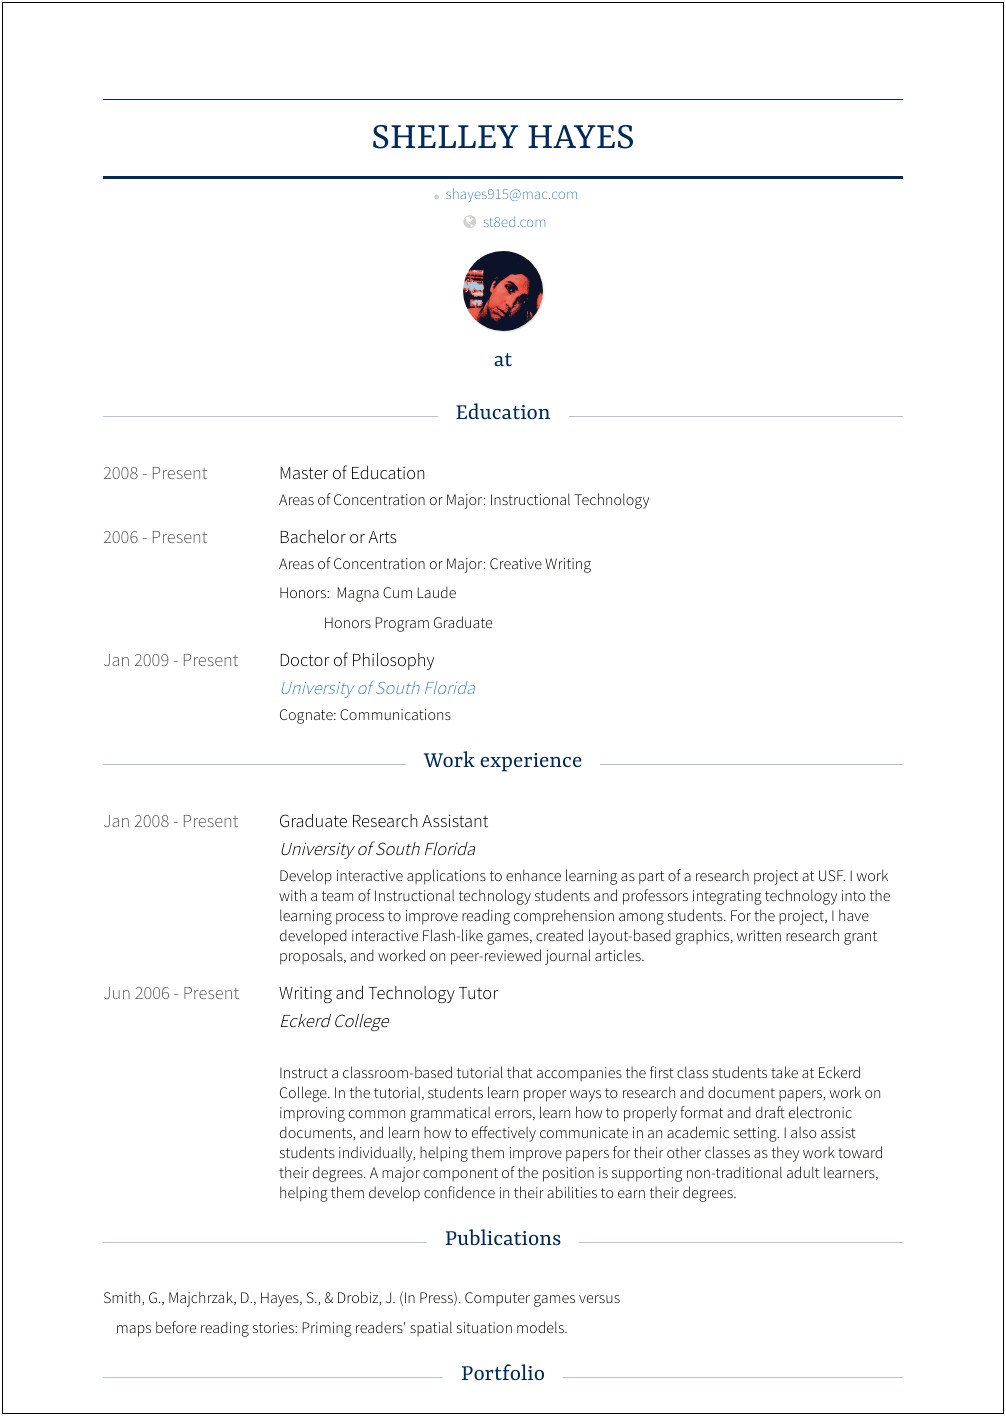 Article Research Assistant Resume Samples